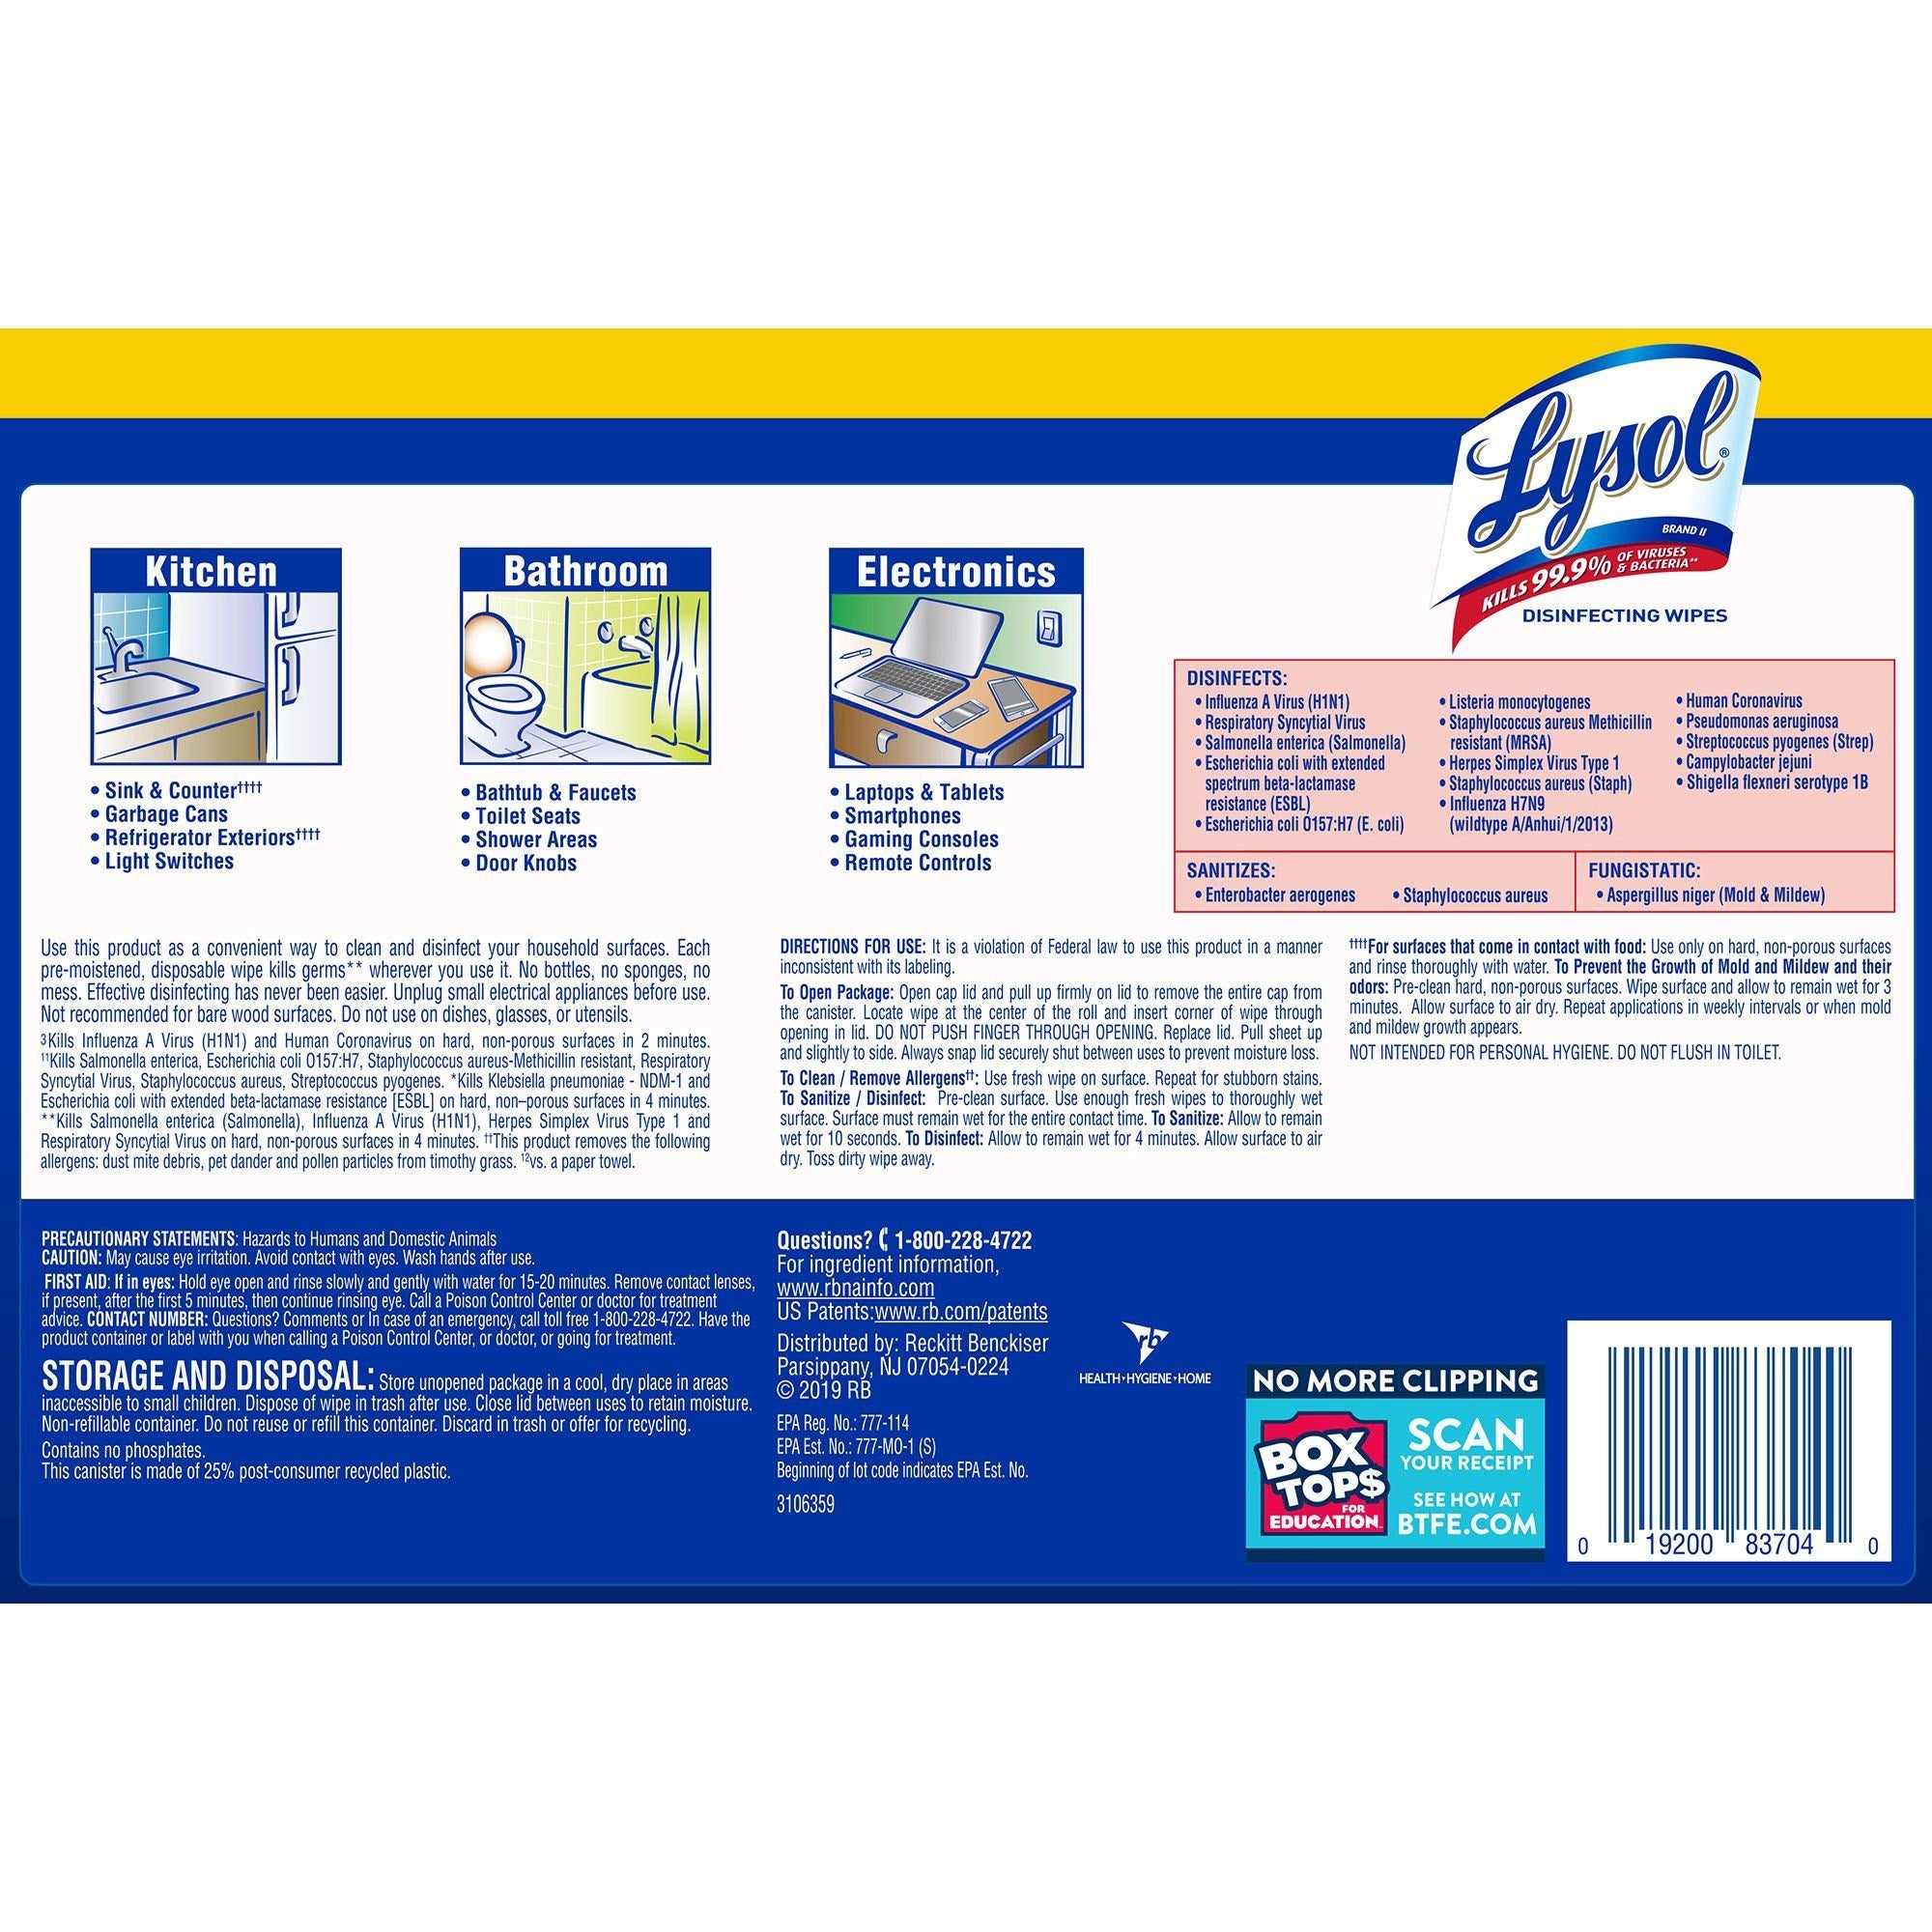 lysol-4-pack-disinfecting-wipes-lemon-lime-scent-800-canister-4-pack-pre-moistened-antibacterial-disinfectant-white_rac90641 - 2